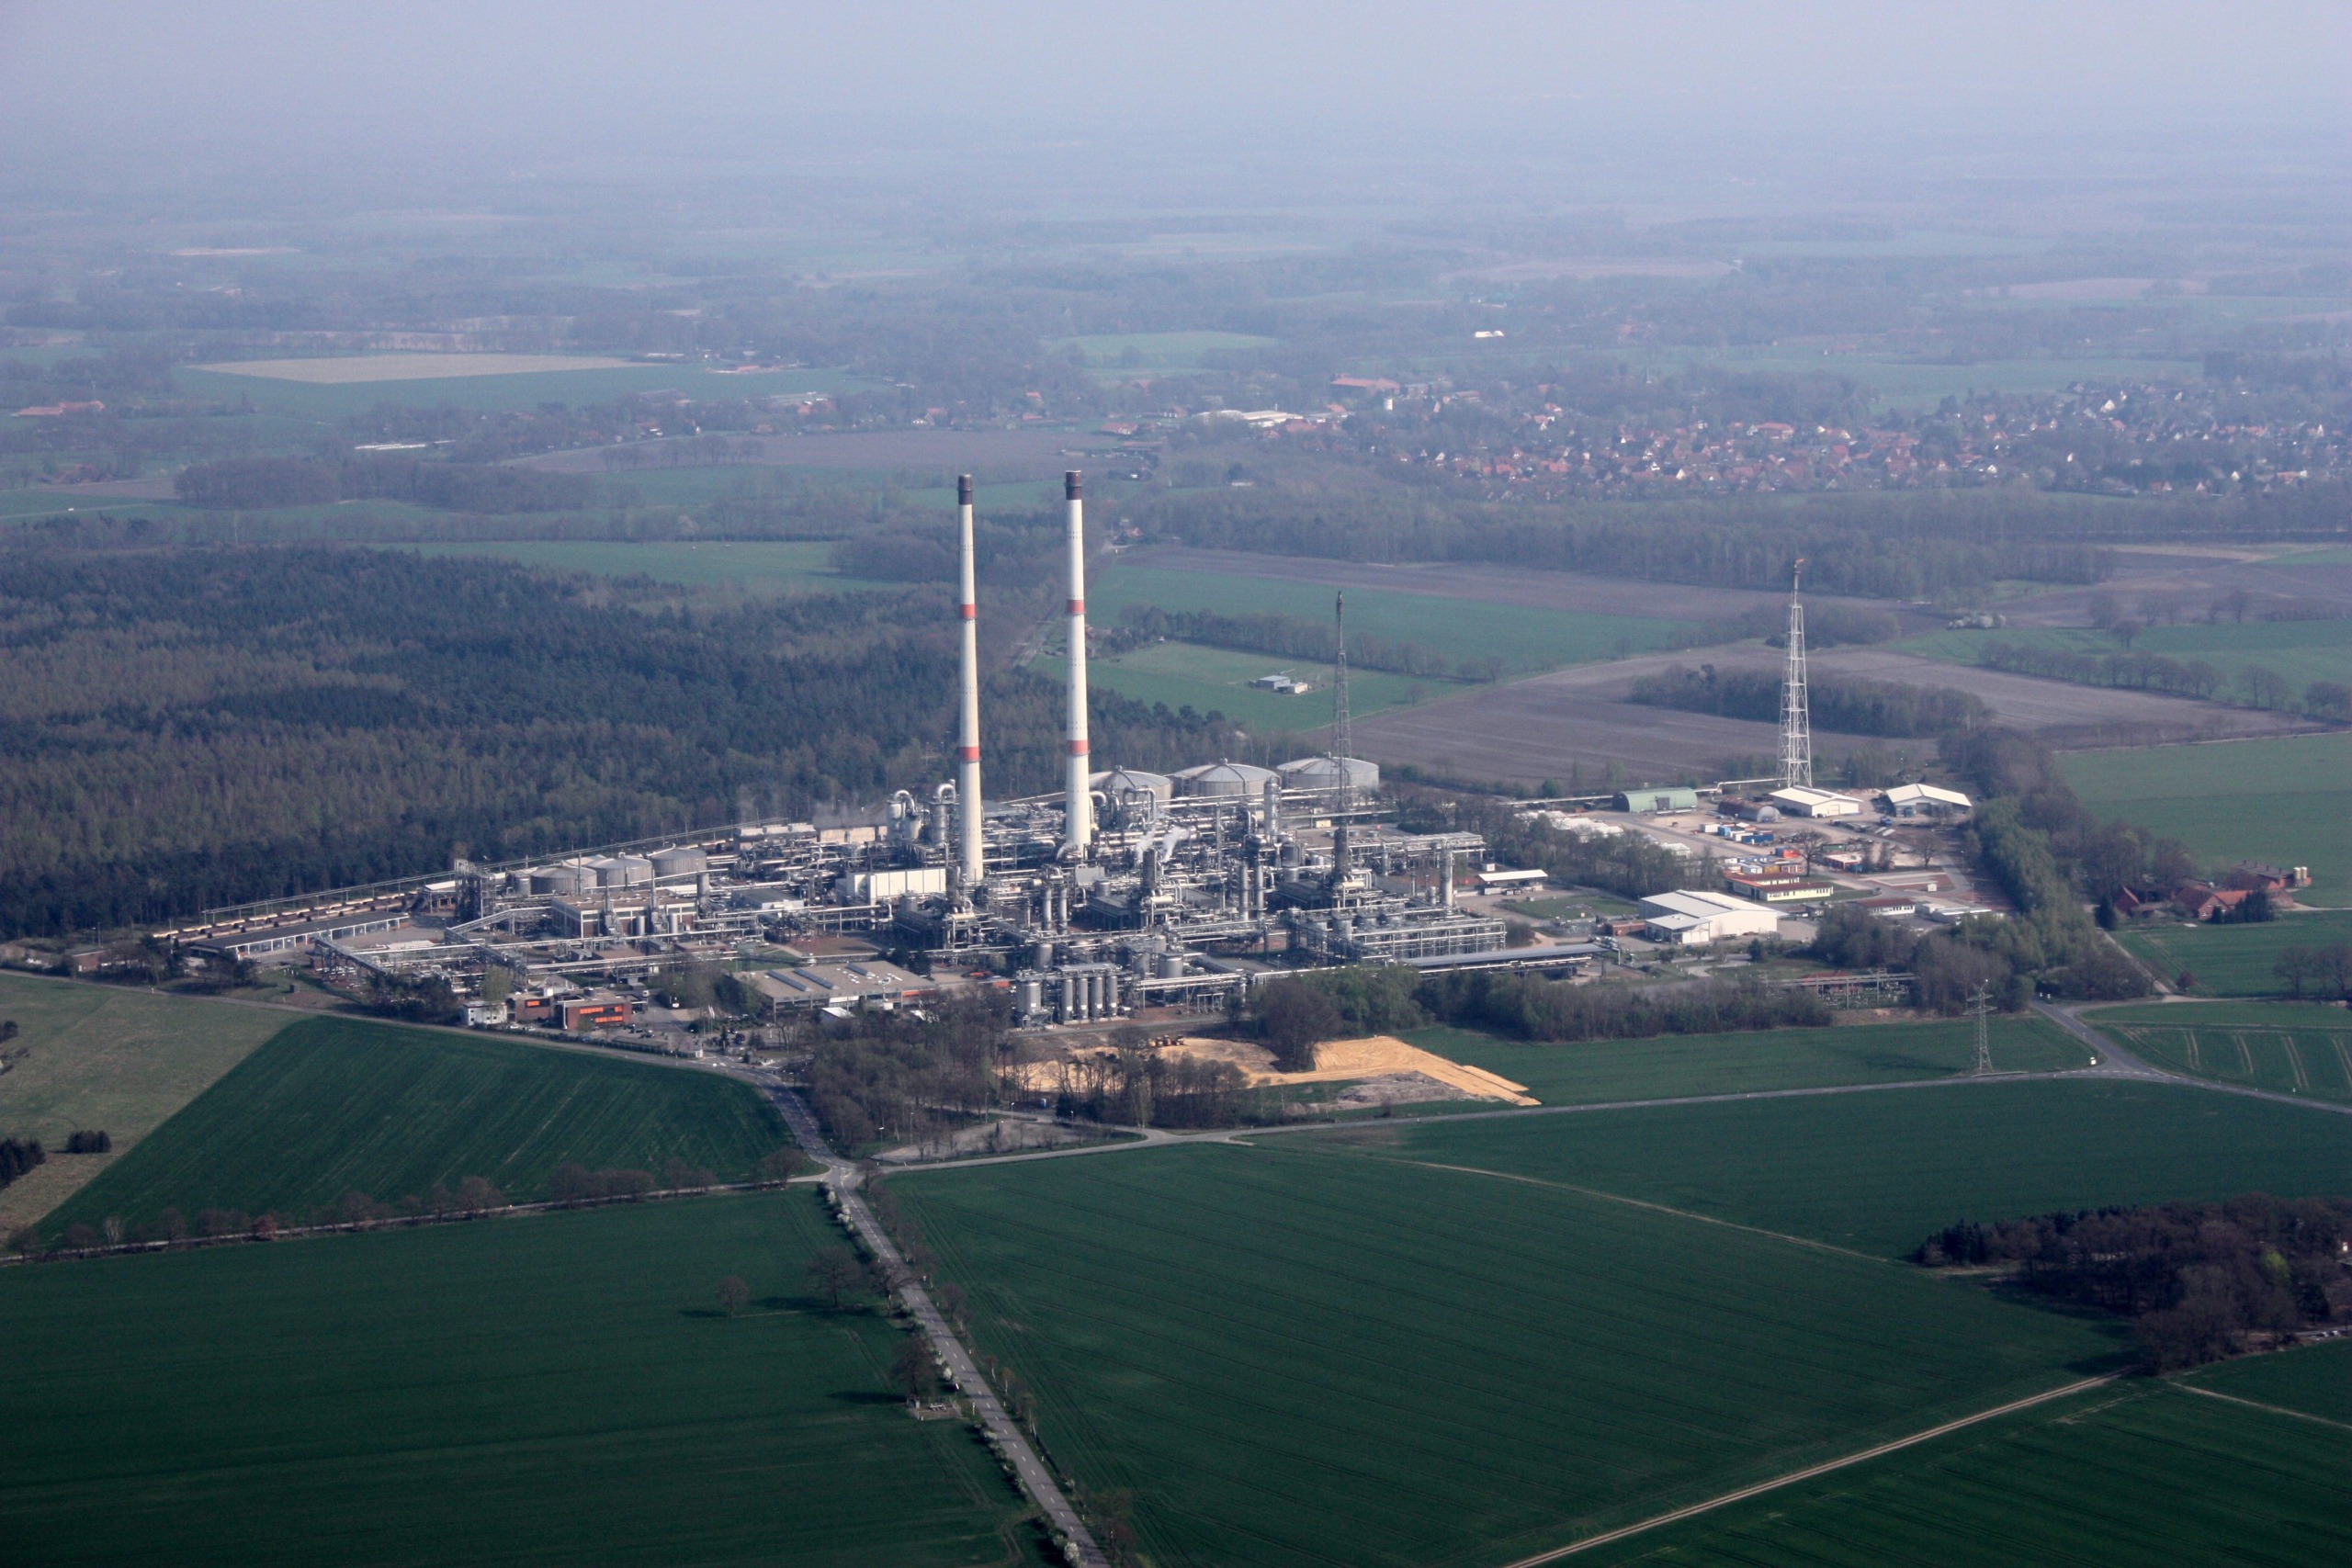 ExxonMobil's natural gas refinery in Germany, which is part of the German ExxonMobil subsidiary involved in the lawsuit against the EU